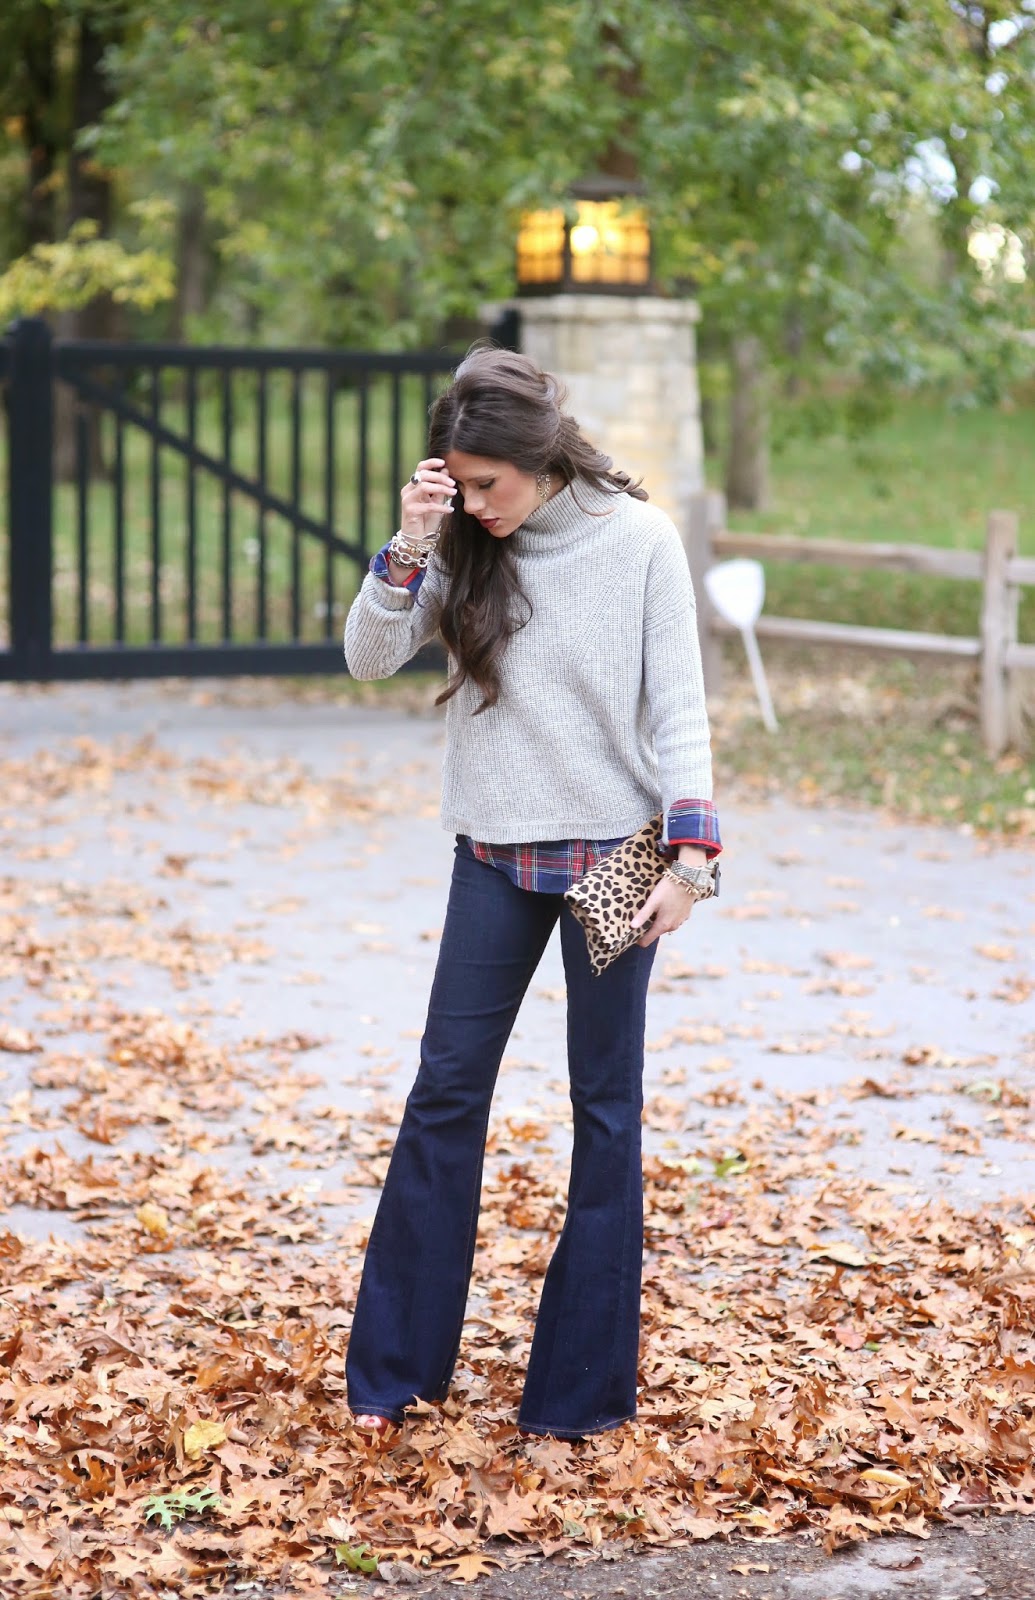 8 Outfits To Re-Create This Fall | The Sweetest Thing